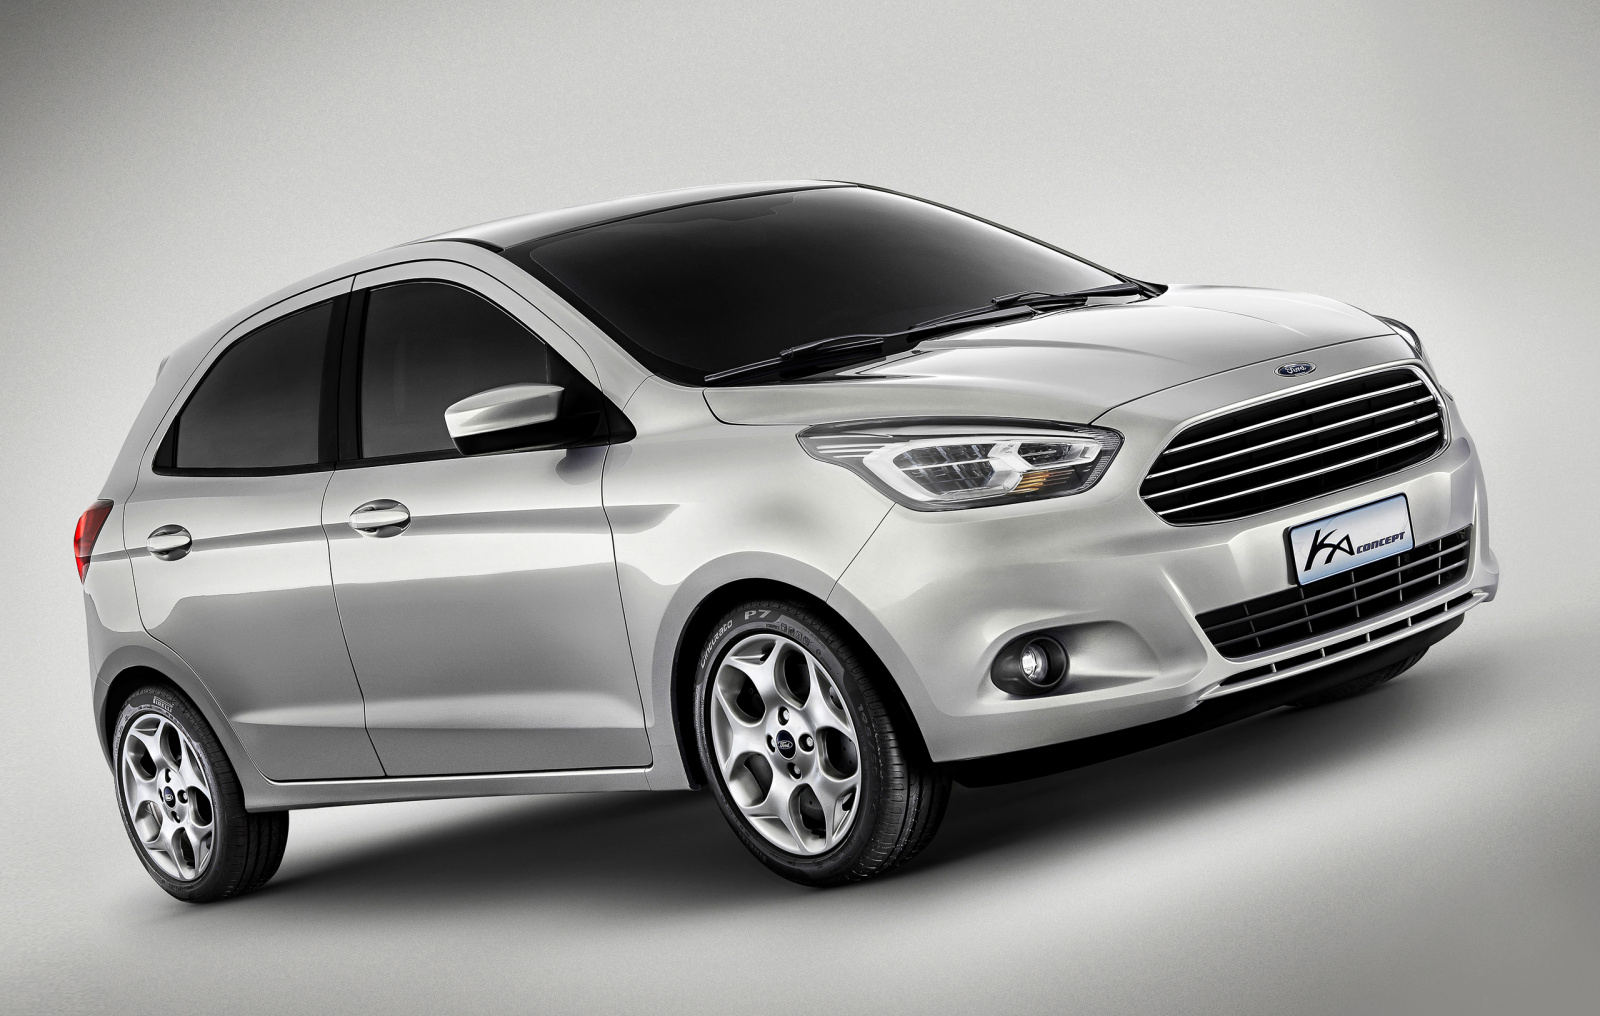 Ford Ka Concept - Foto eines Ford Concept-Cars